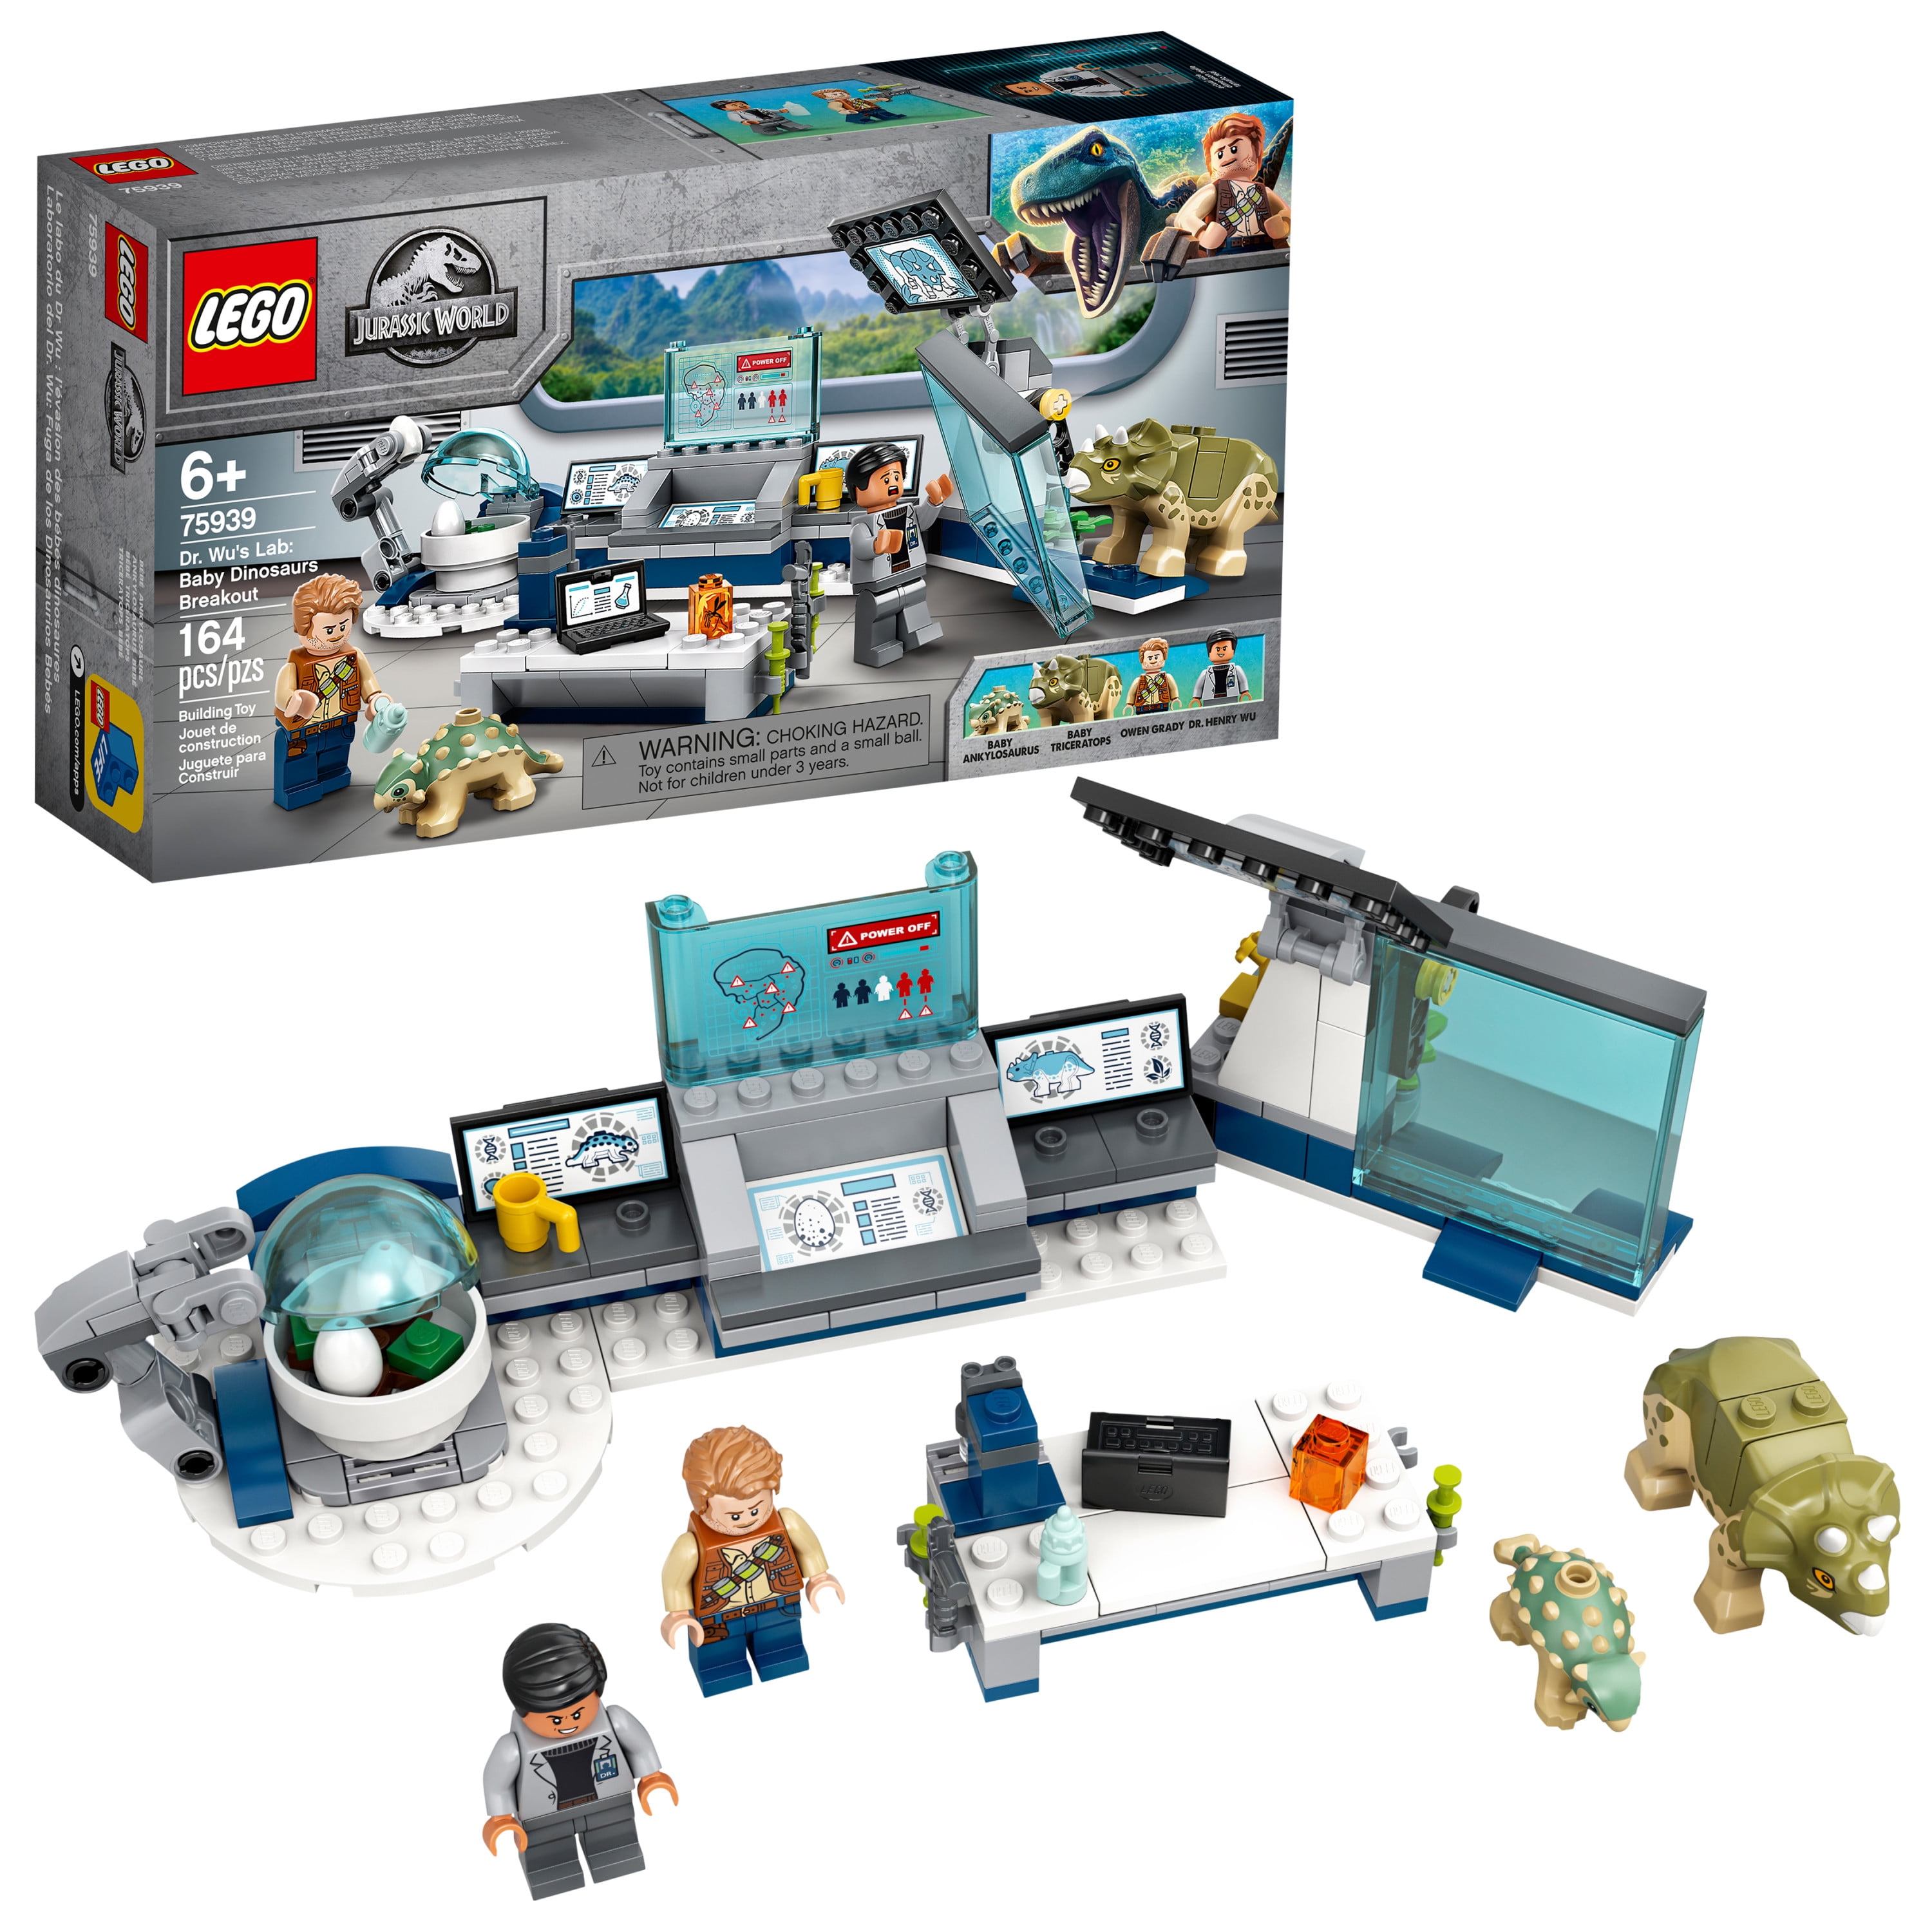 LEGO Jurassic World Dr. Wu's Lab: Baby Dinosaurs Breakout 75939 Dinosaur Toy for Creative Play Pieces) - Walmart.com